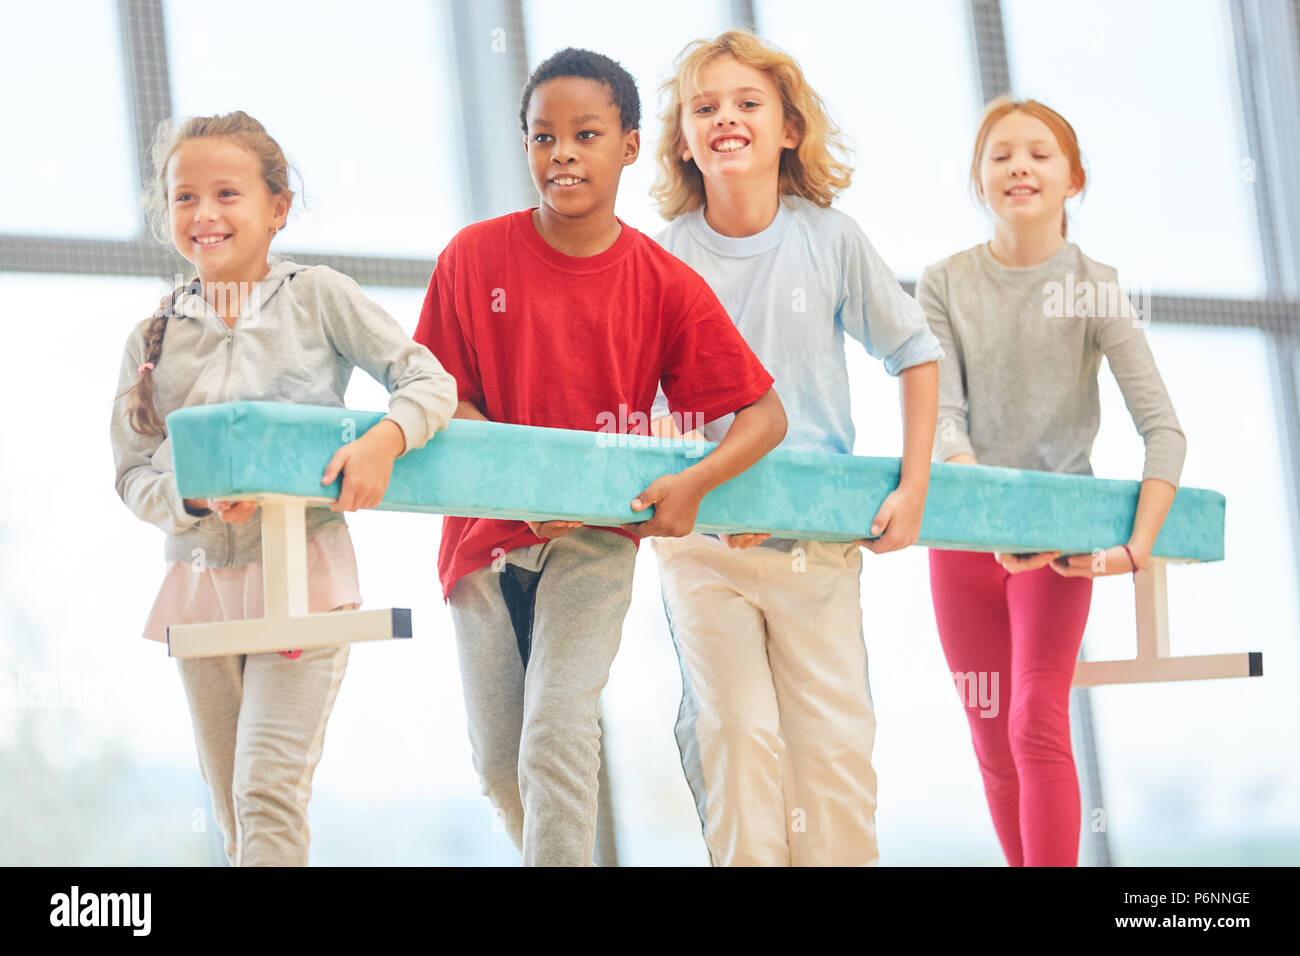 Group of students together carry a balance beam in physical education class Stock Photo